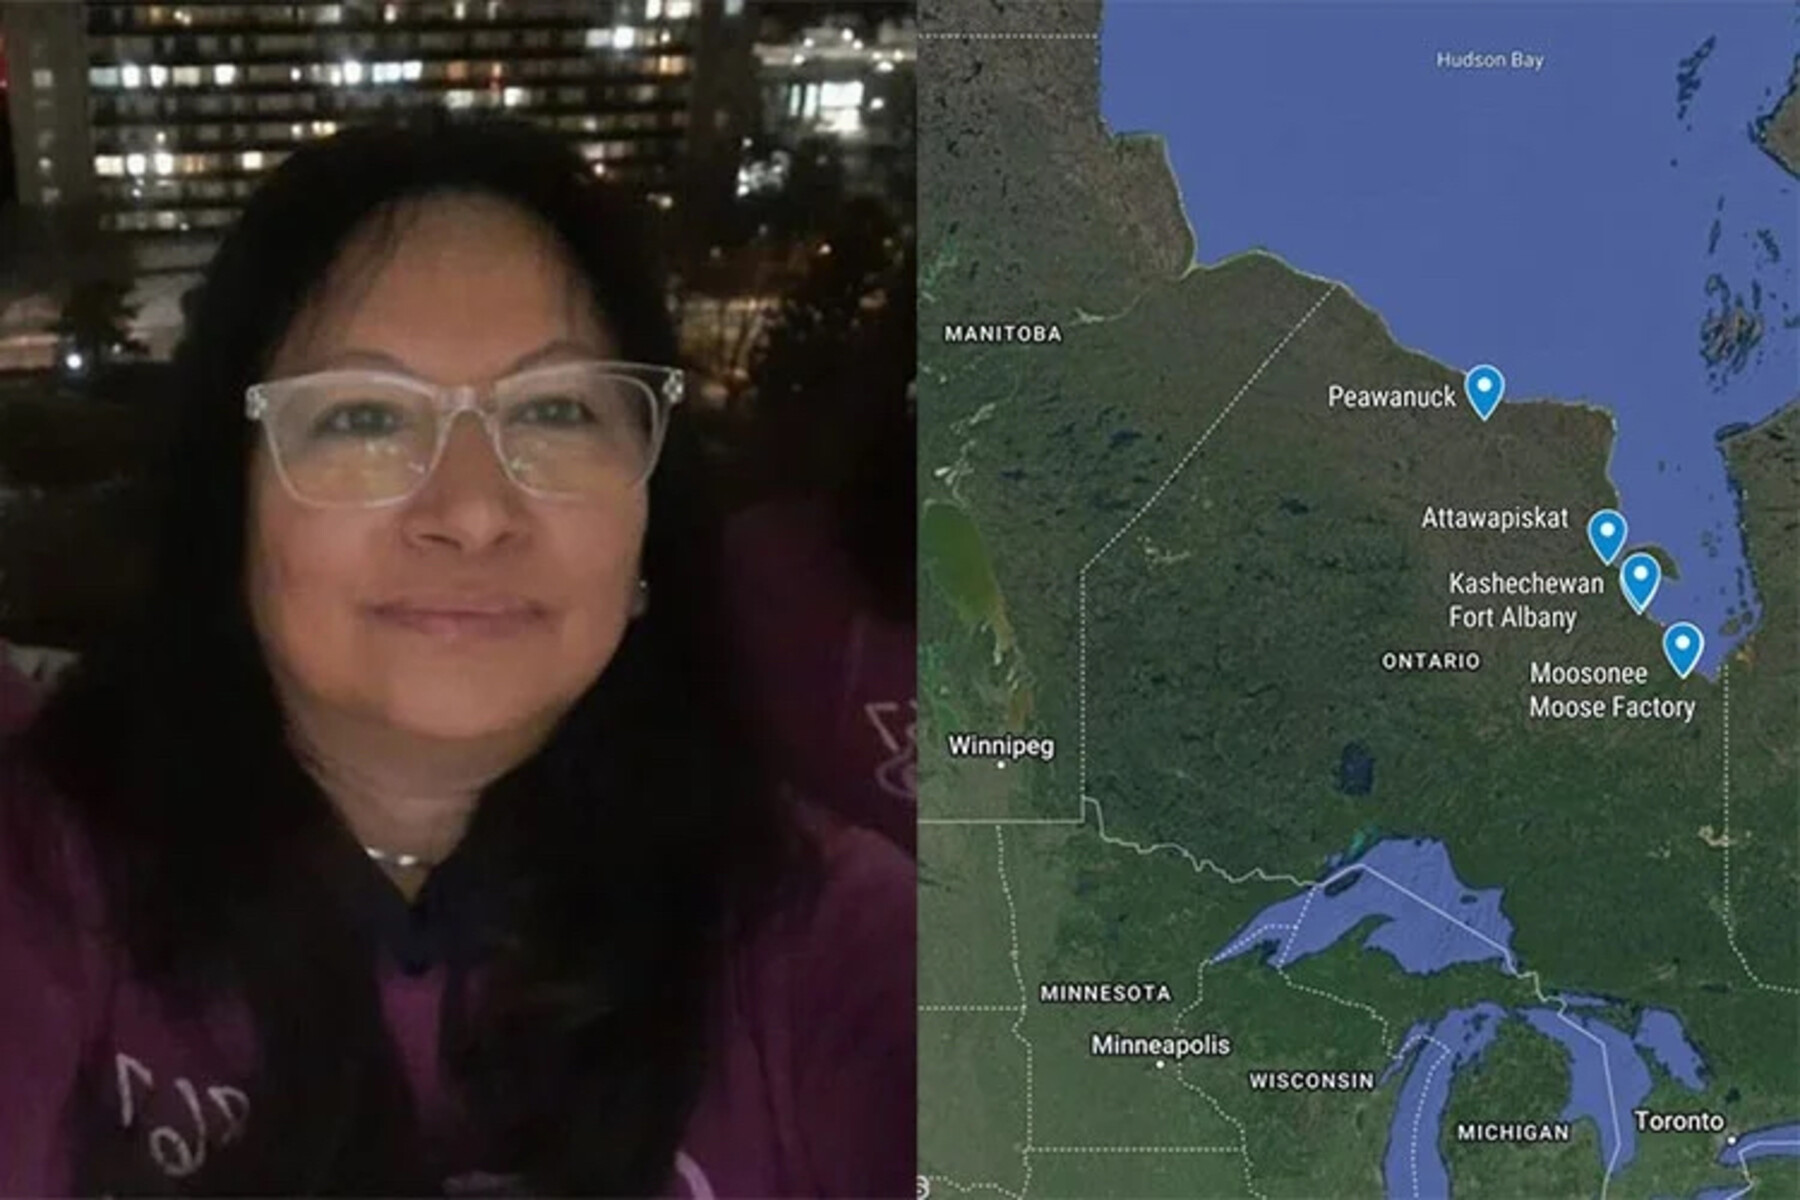 Image of Gloria and map of Ontario